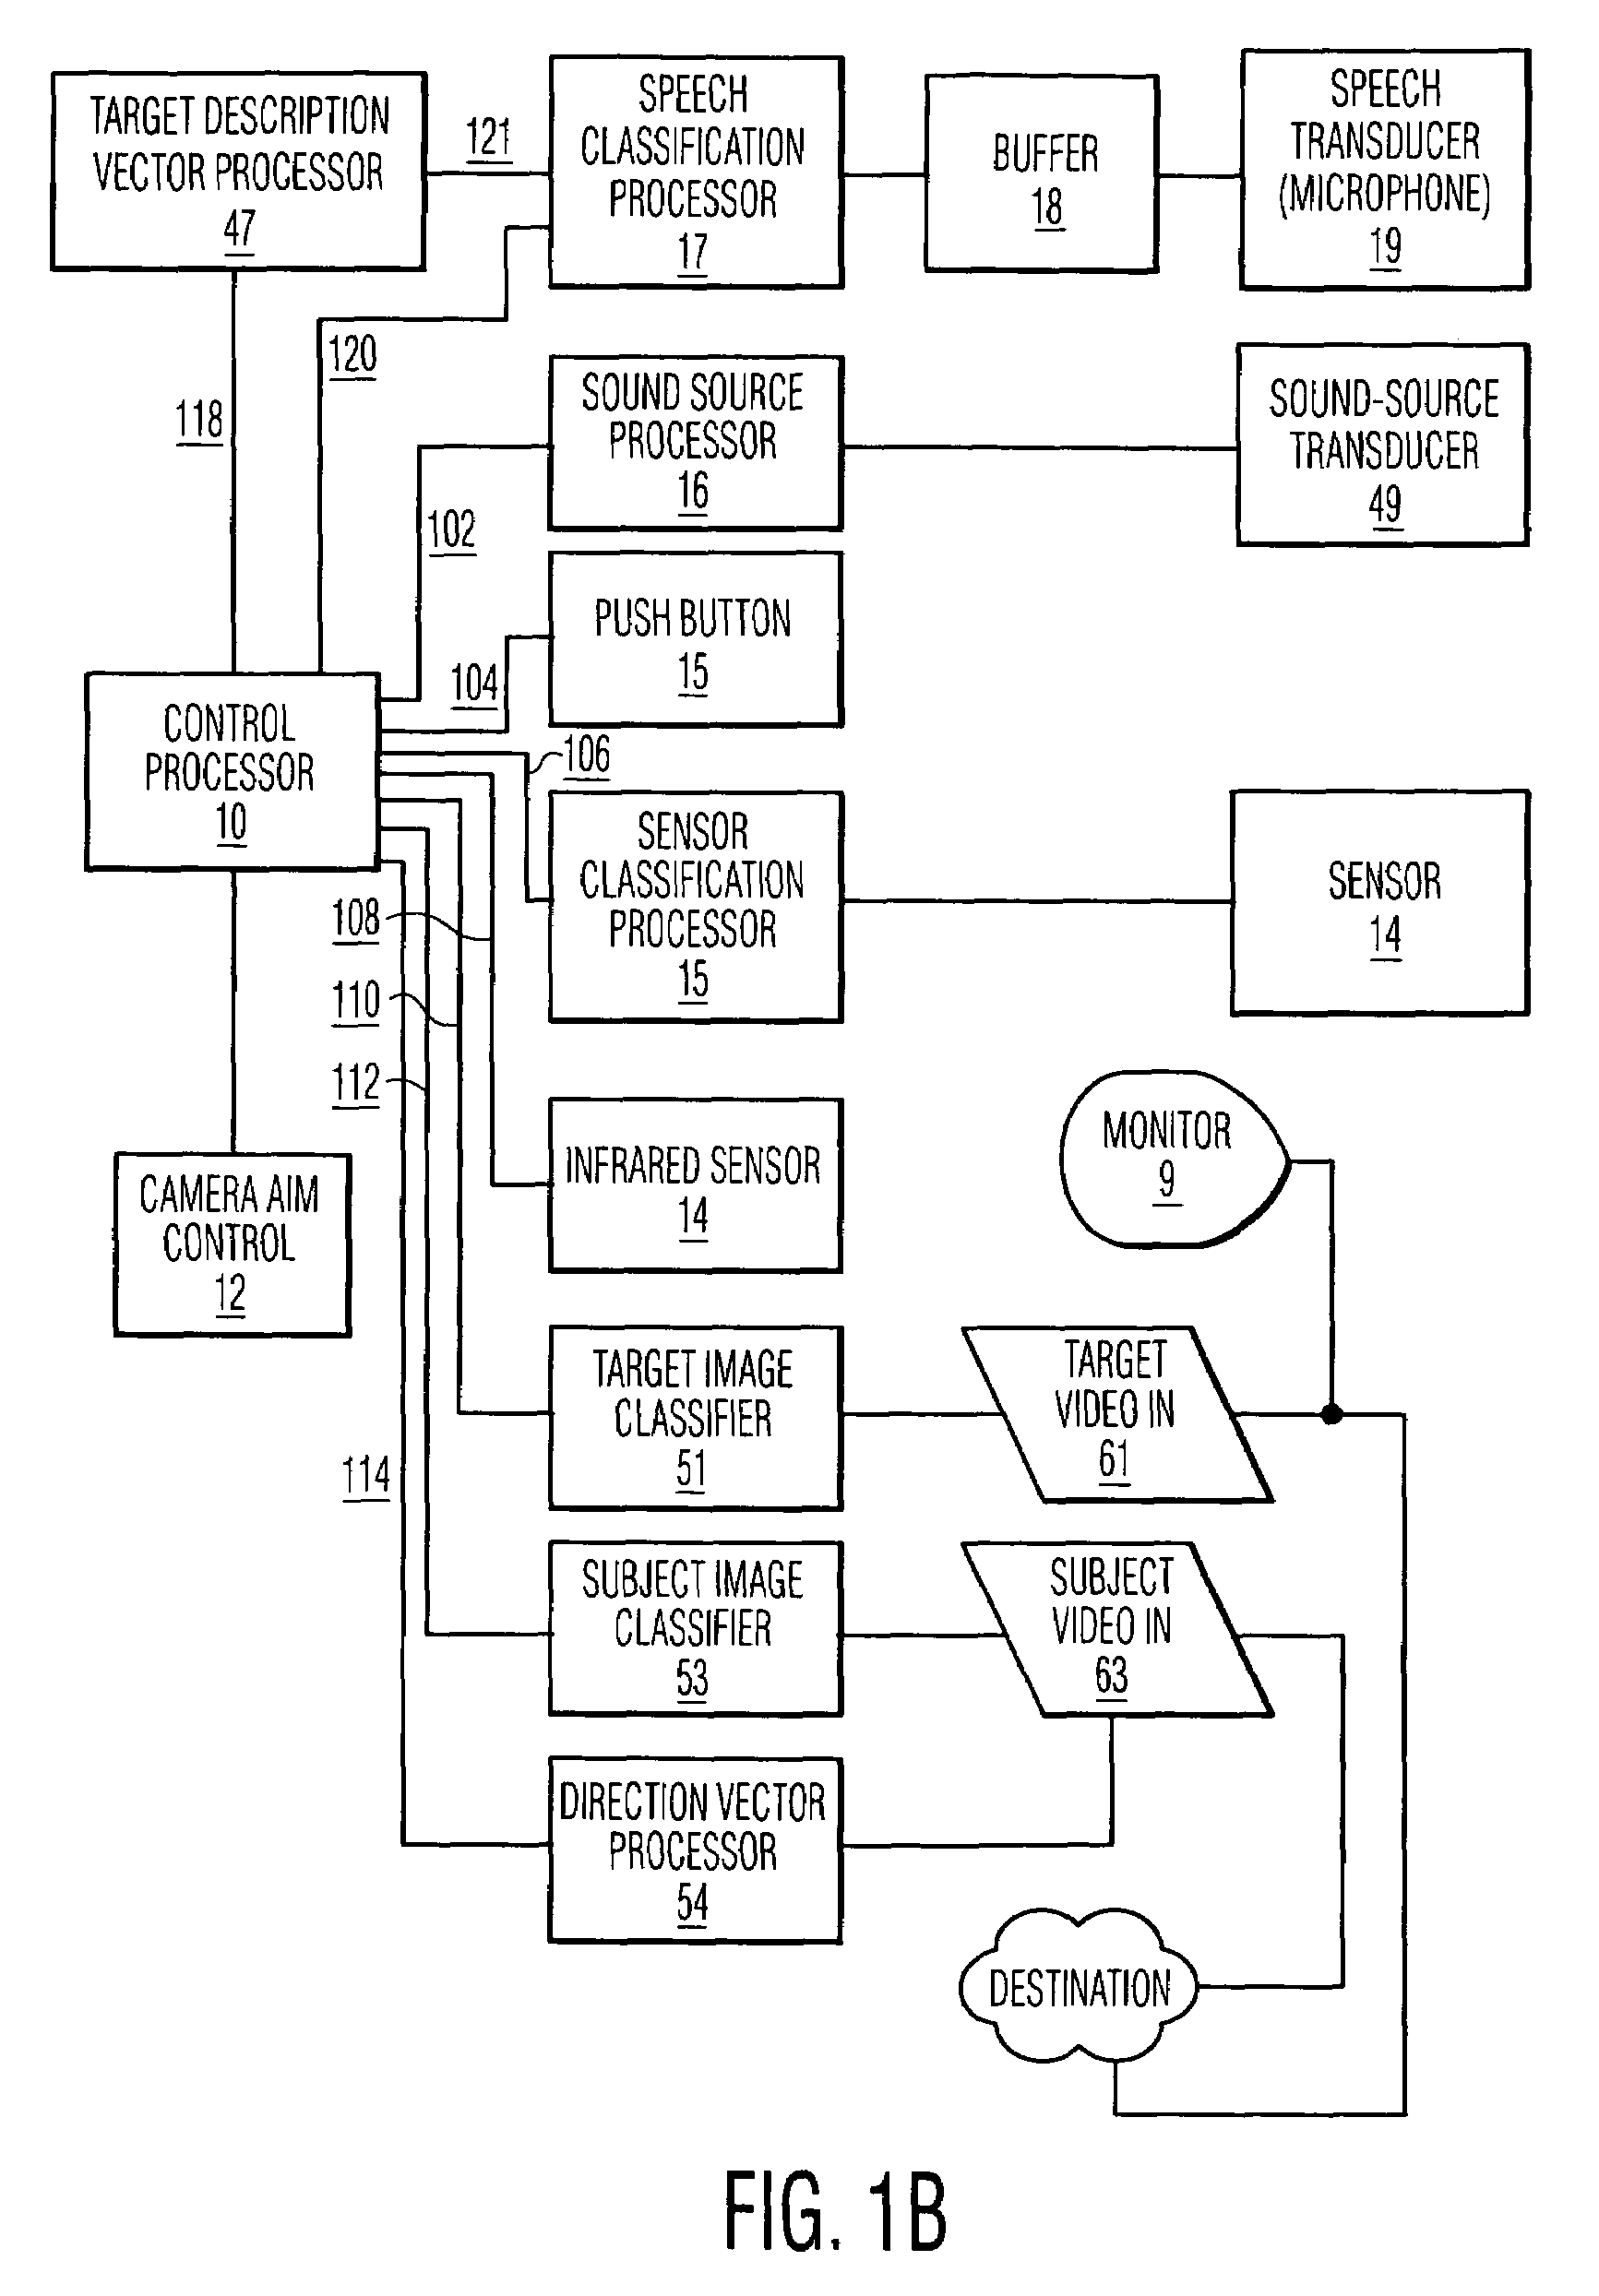 Multi-modal video target acquisition and re-direction system and method